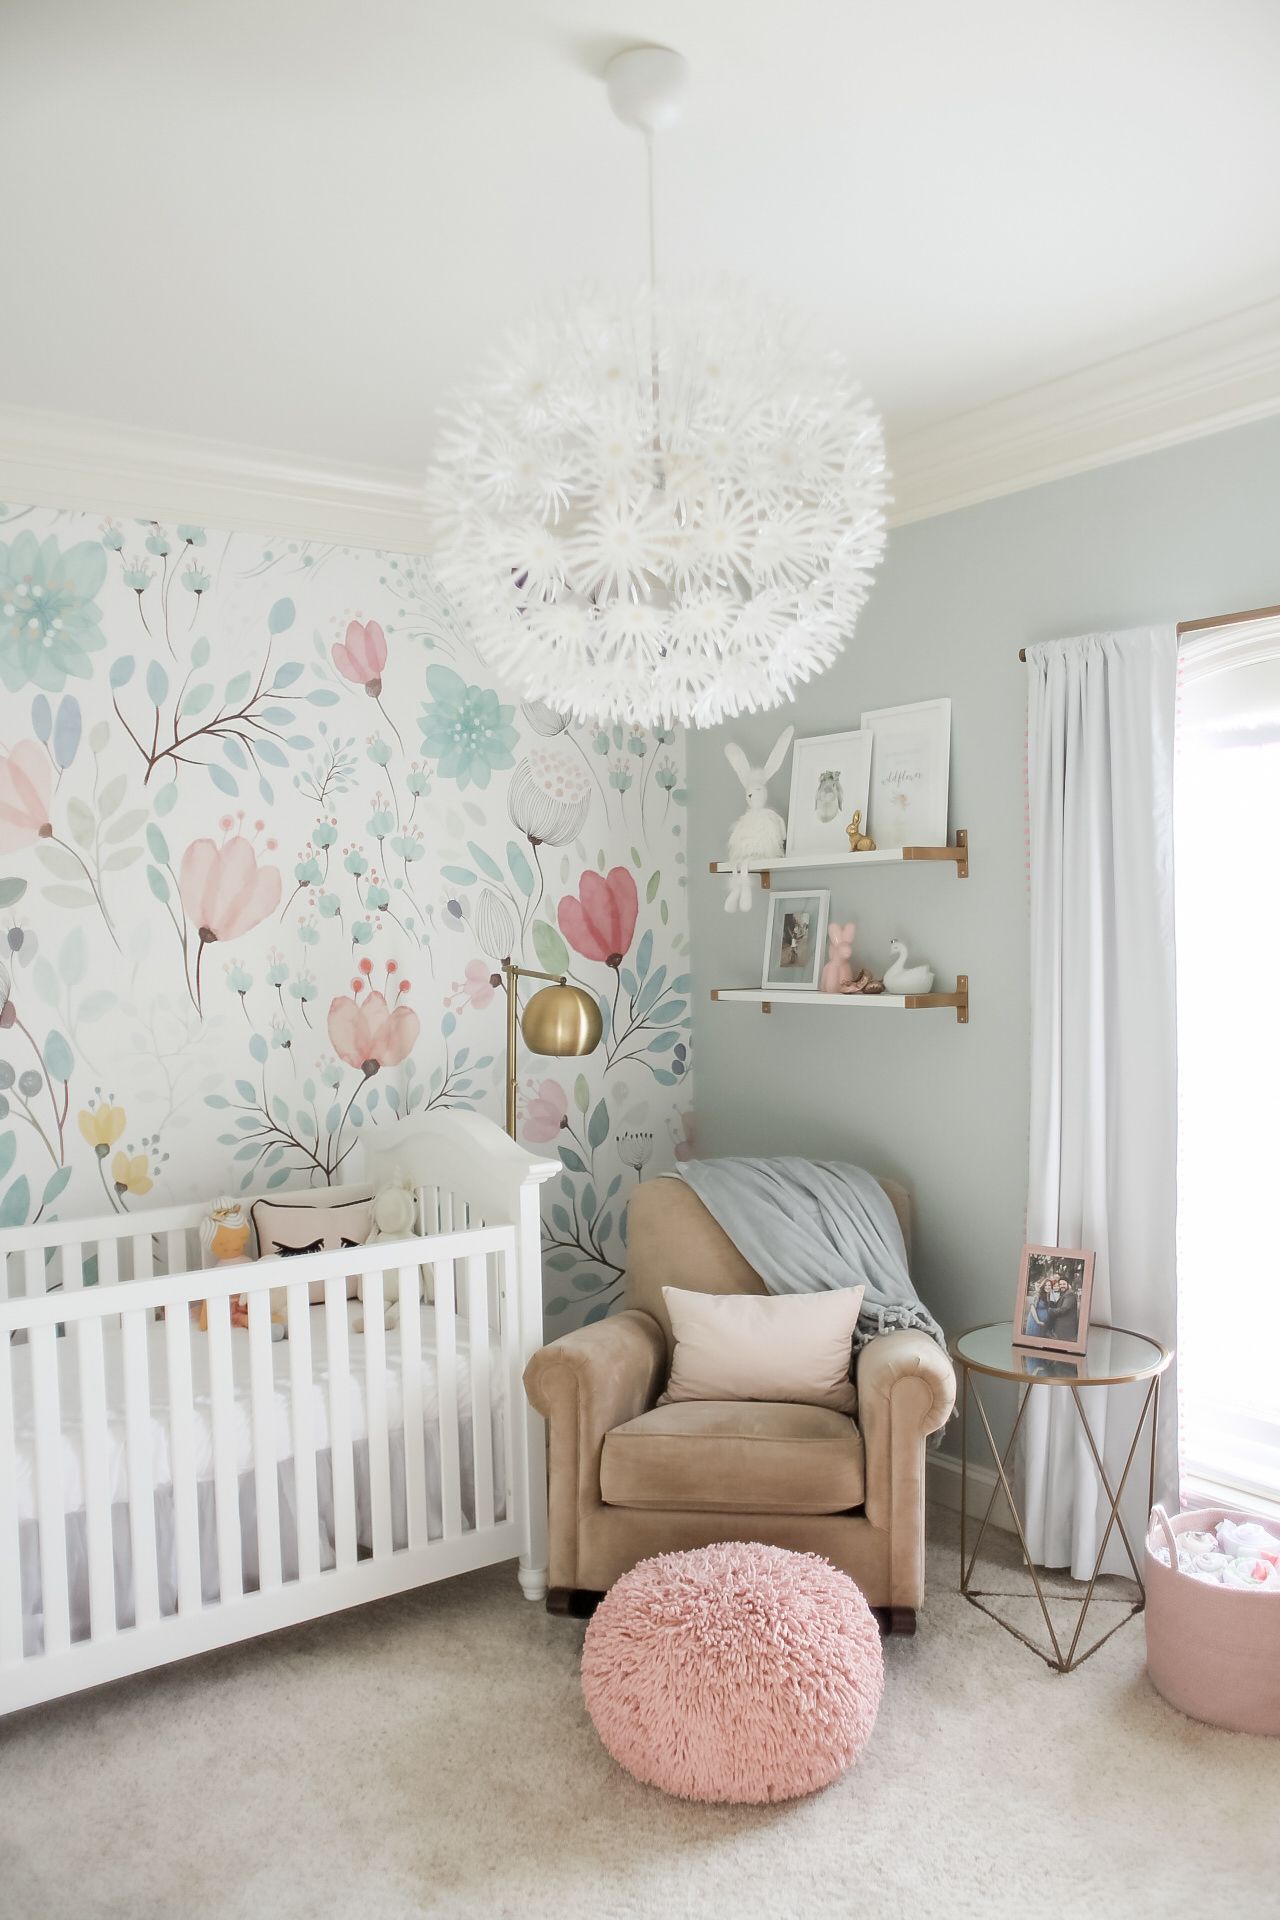 I scoured Pinterest and Instagram for inspiration and fell in love with  this wallpaper! Once